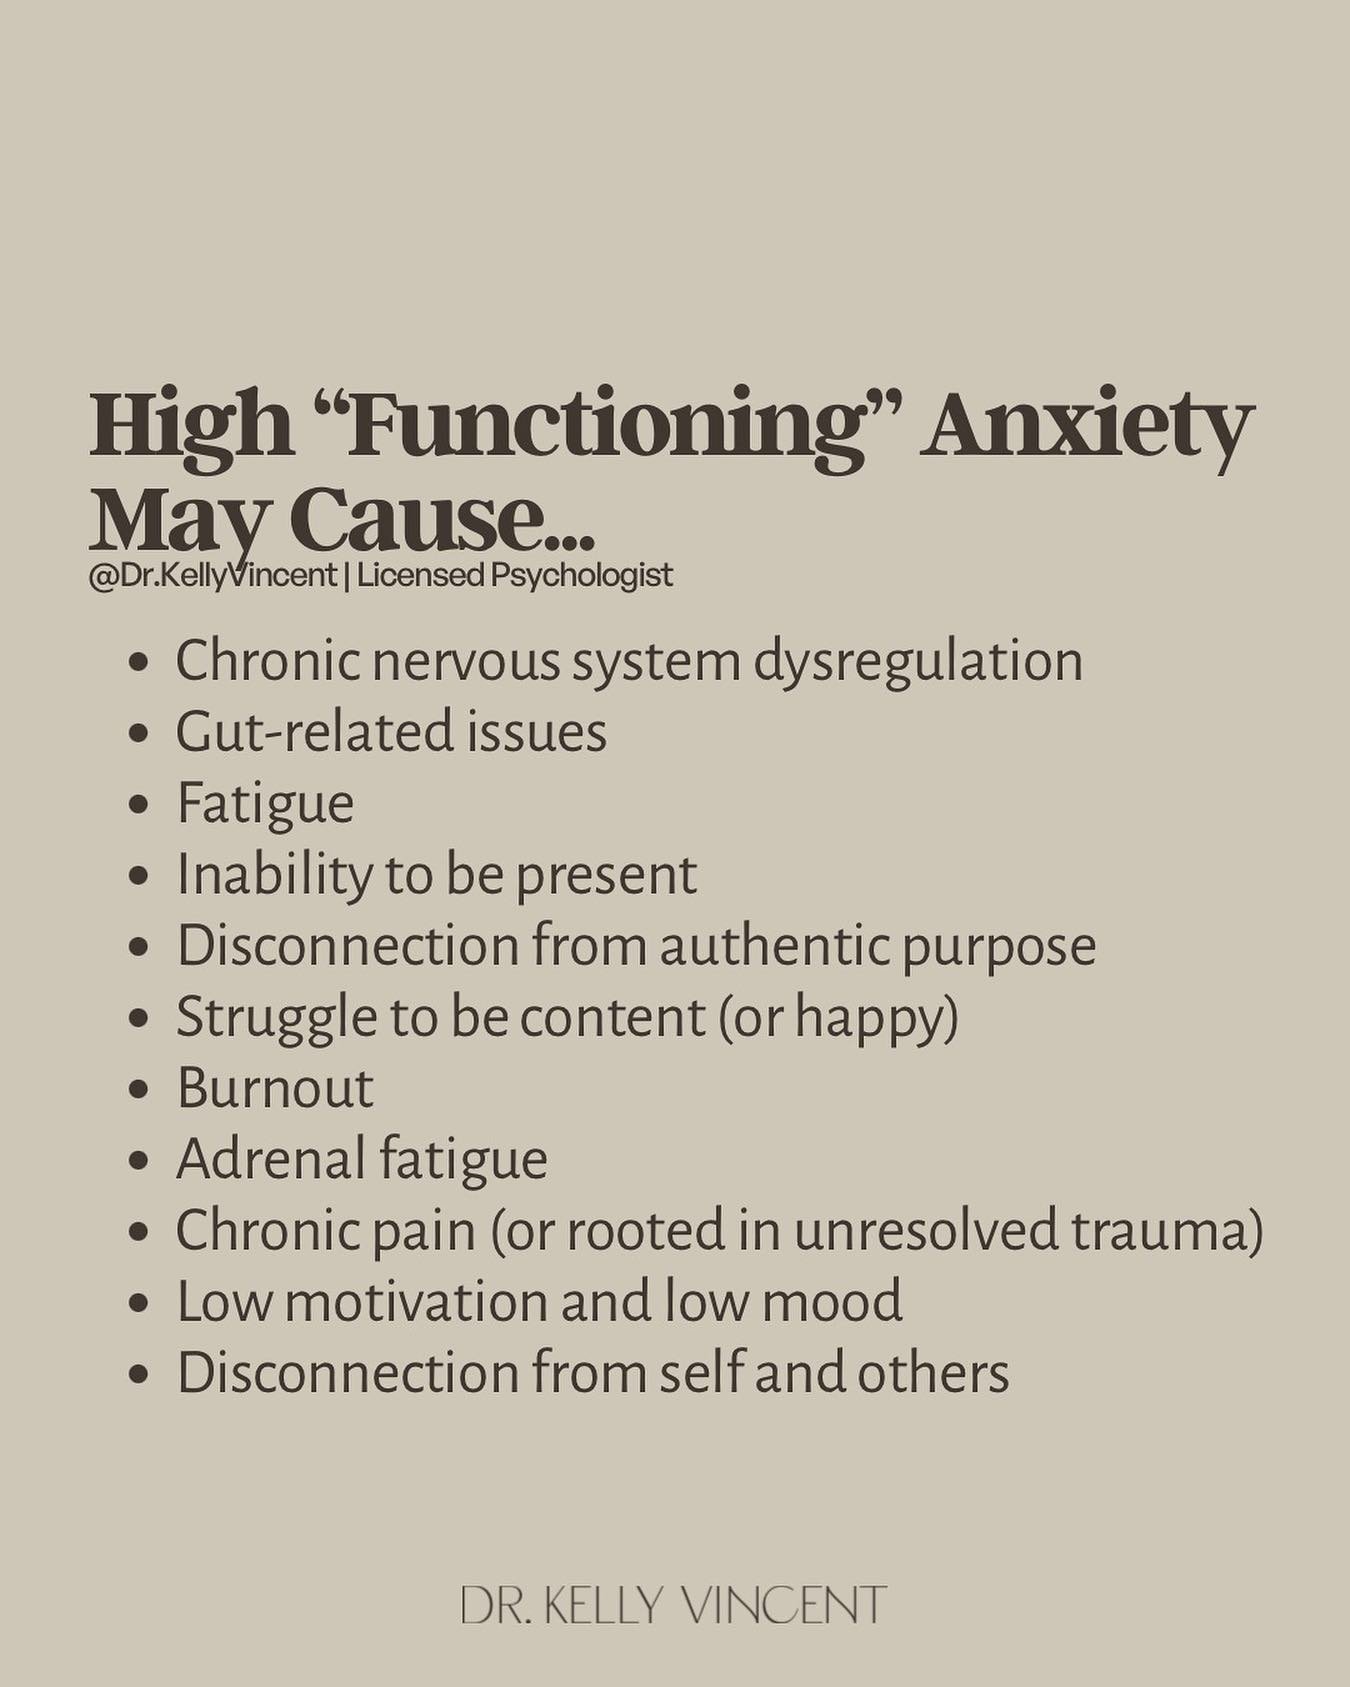 While High &ldquo;Functioning&rdquo; Anxiety may not be formally recognized in clinical terms, 📖its resonance among many individuals is undeniable 😓

HFA characterizes those who grapple with anxiety and accompanying symptoms, 👉 yet manage to navig